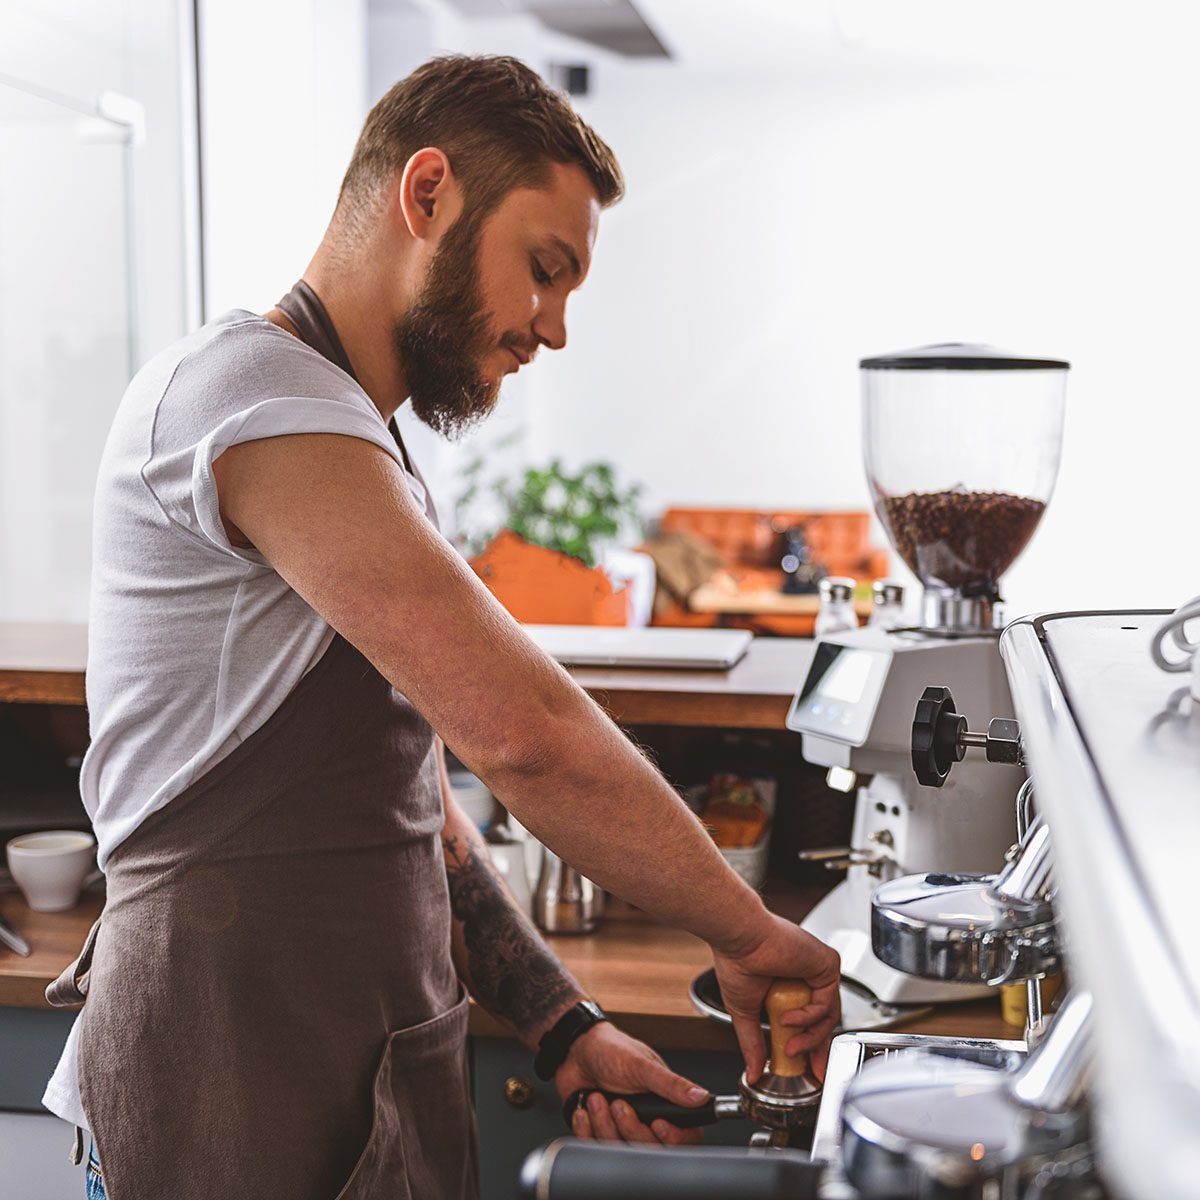 https://www.tasteofhome.com/wp-content/uploads/2019/08/bearded-barista-tamping-ground-coffee-shutterstock_520565953.jpg?fit=700%2C700